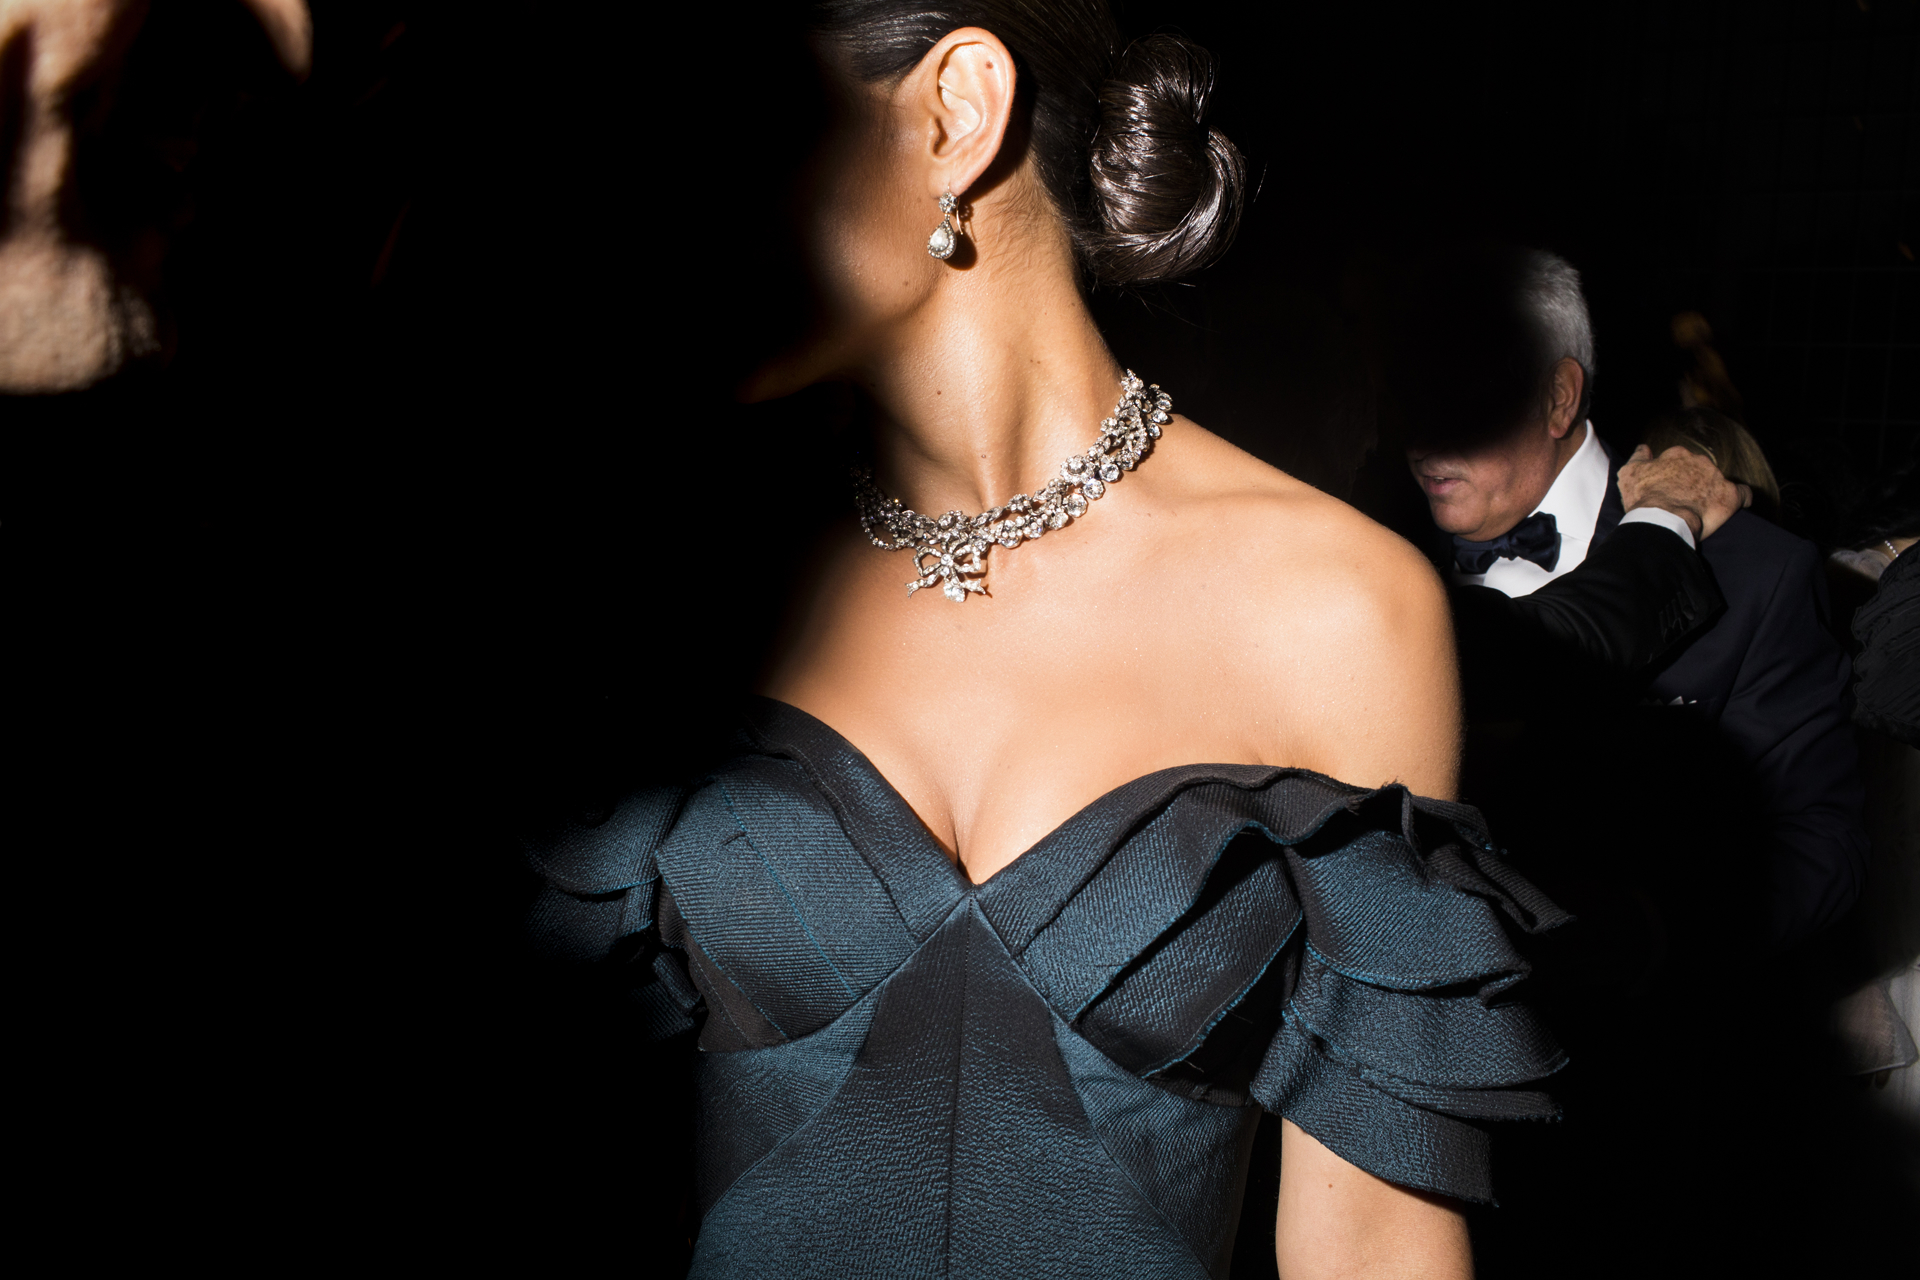 The Necklace (Katie Holmes at the Met Gala) by Landon Nordeman